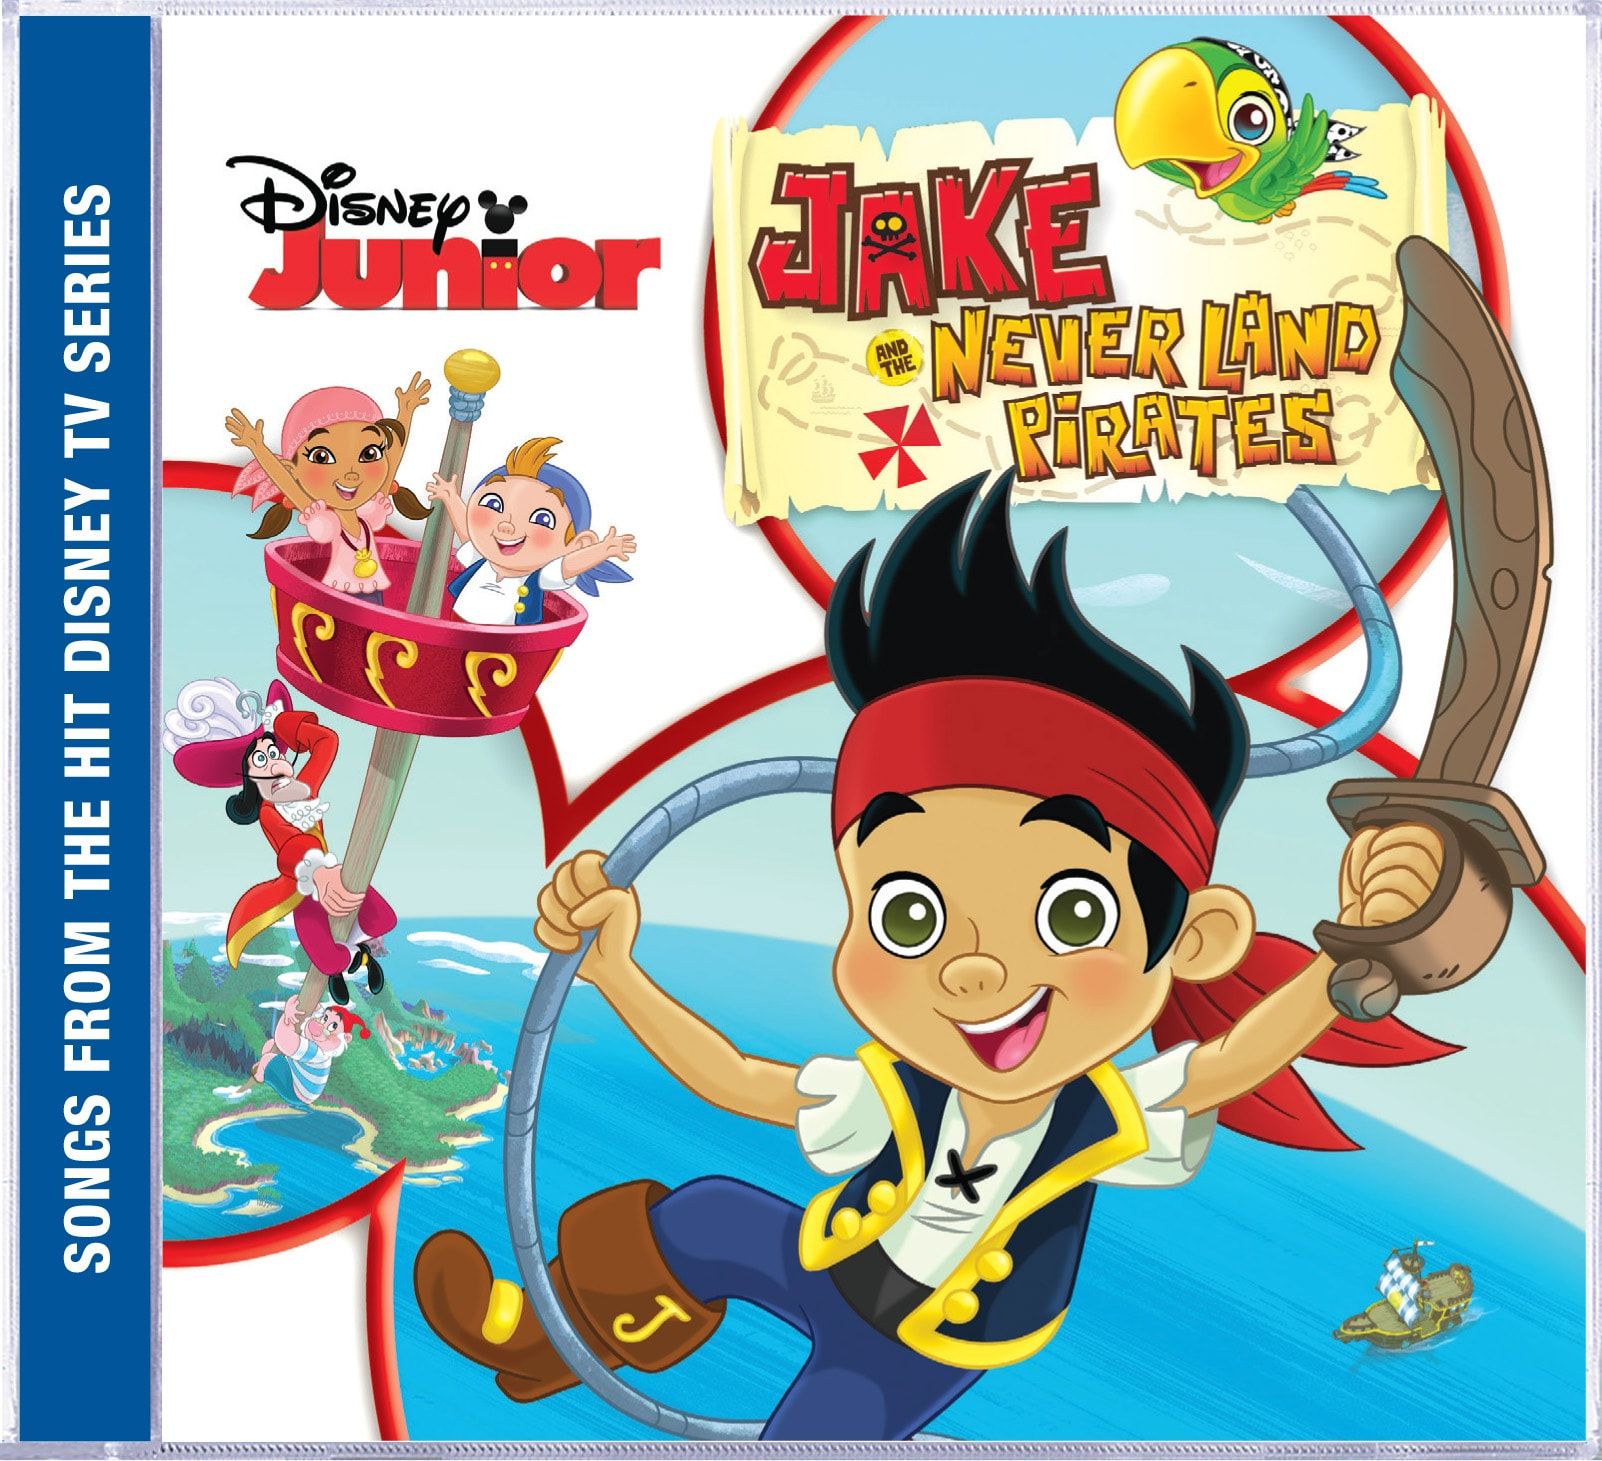 Jake and the Never Land Pirates.